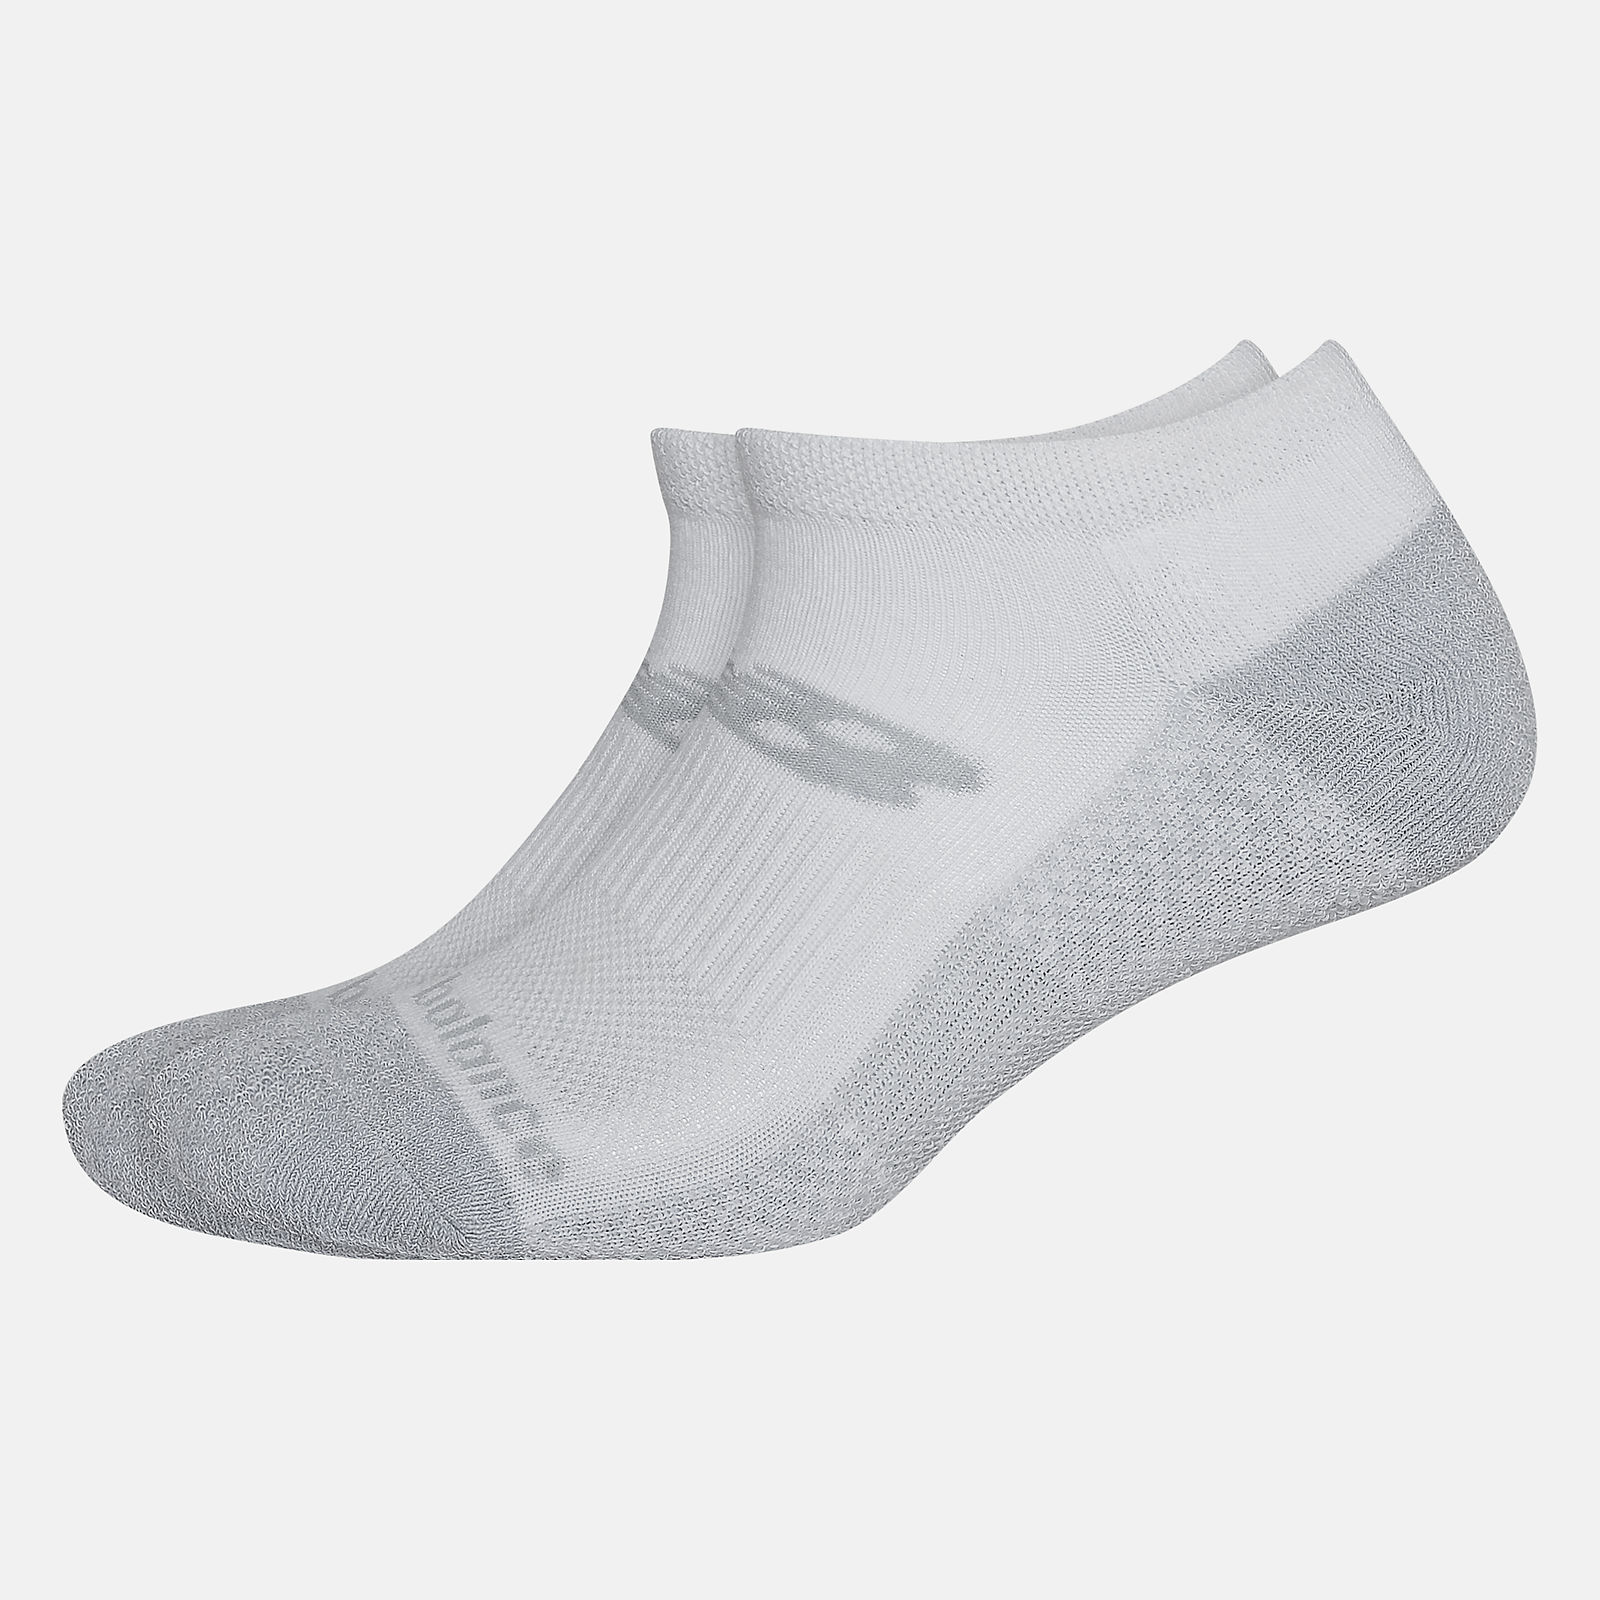 The Comfort Sock Mens No Show Low Cut Sports Socks with Cushion for Running TCS Walking and Other Workouts 